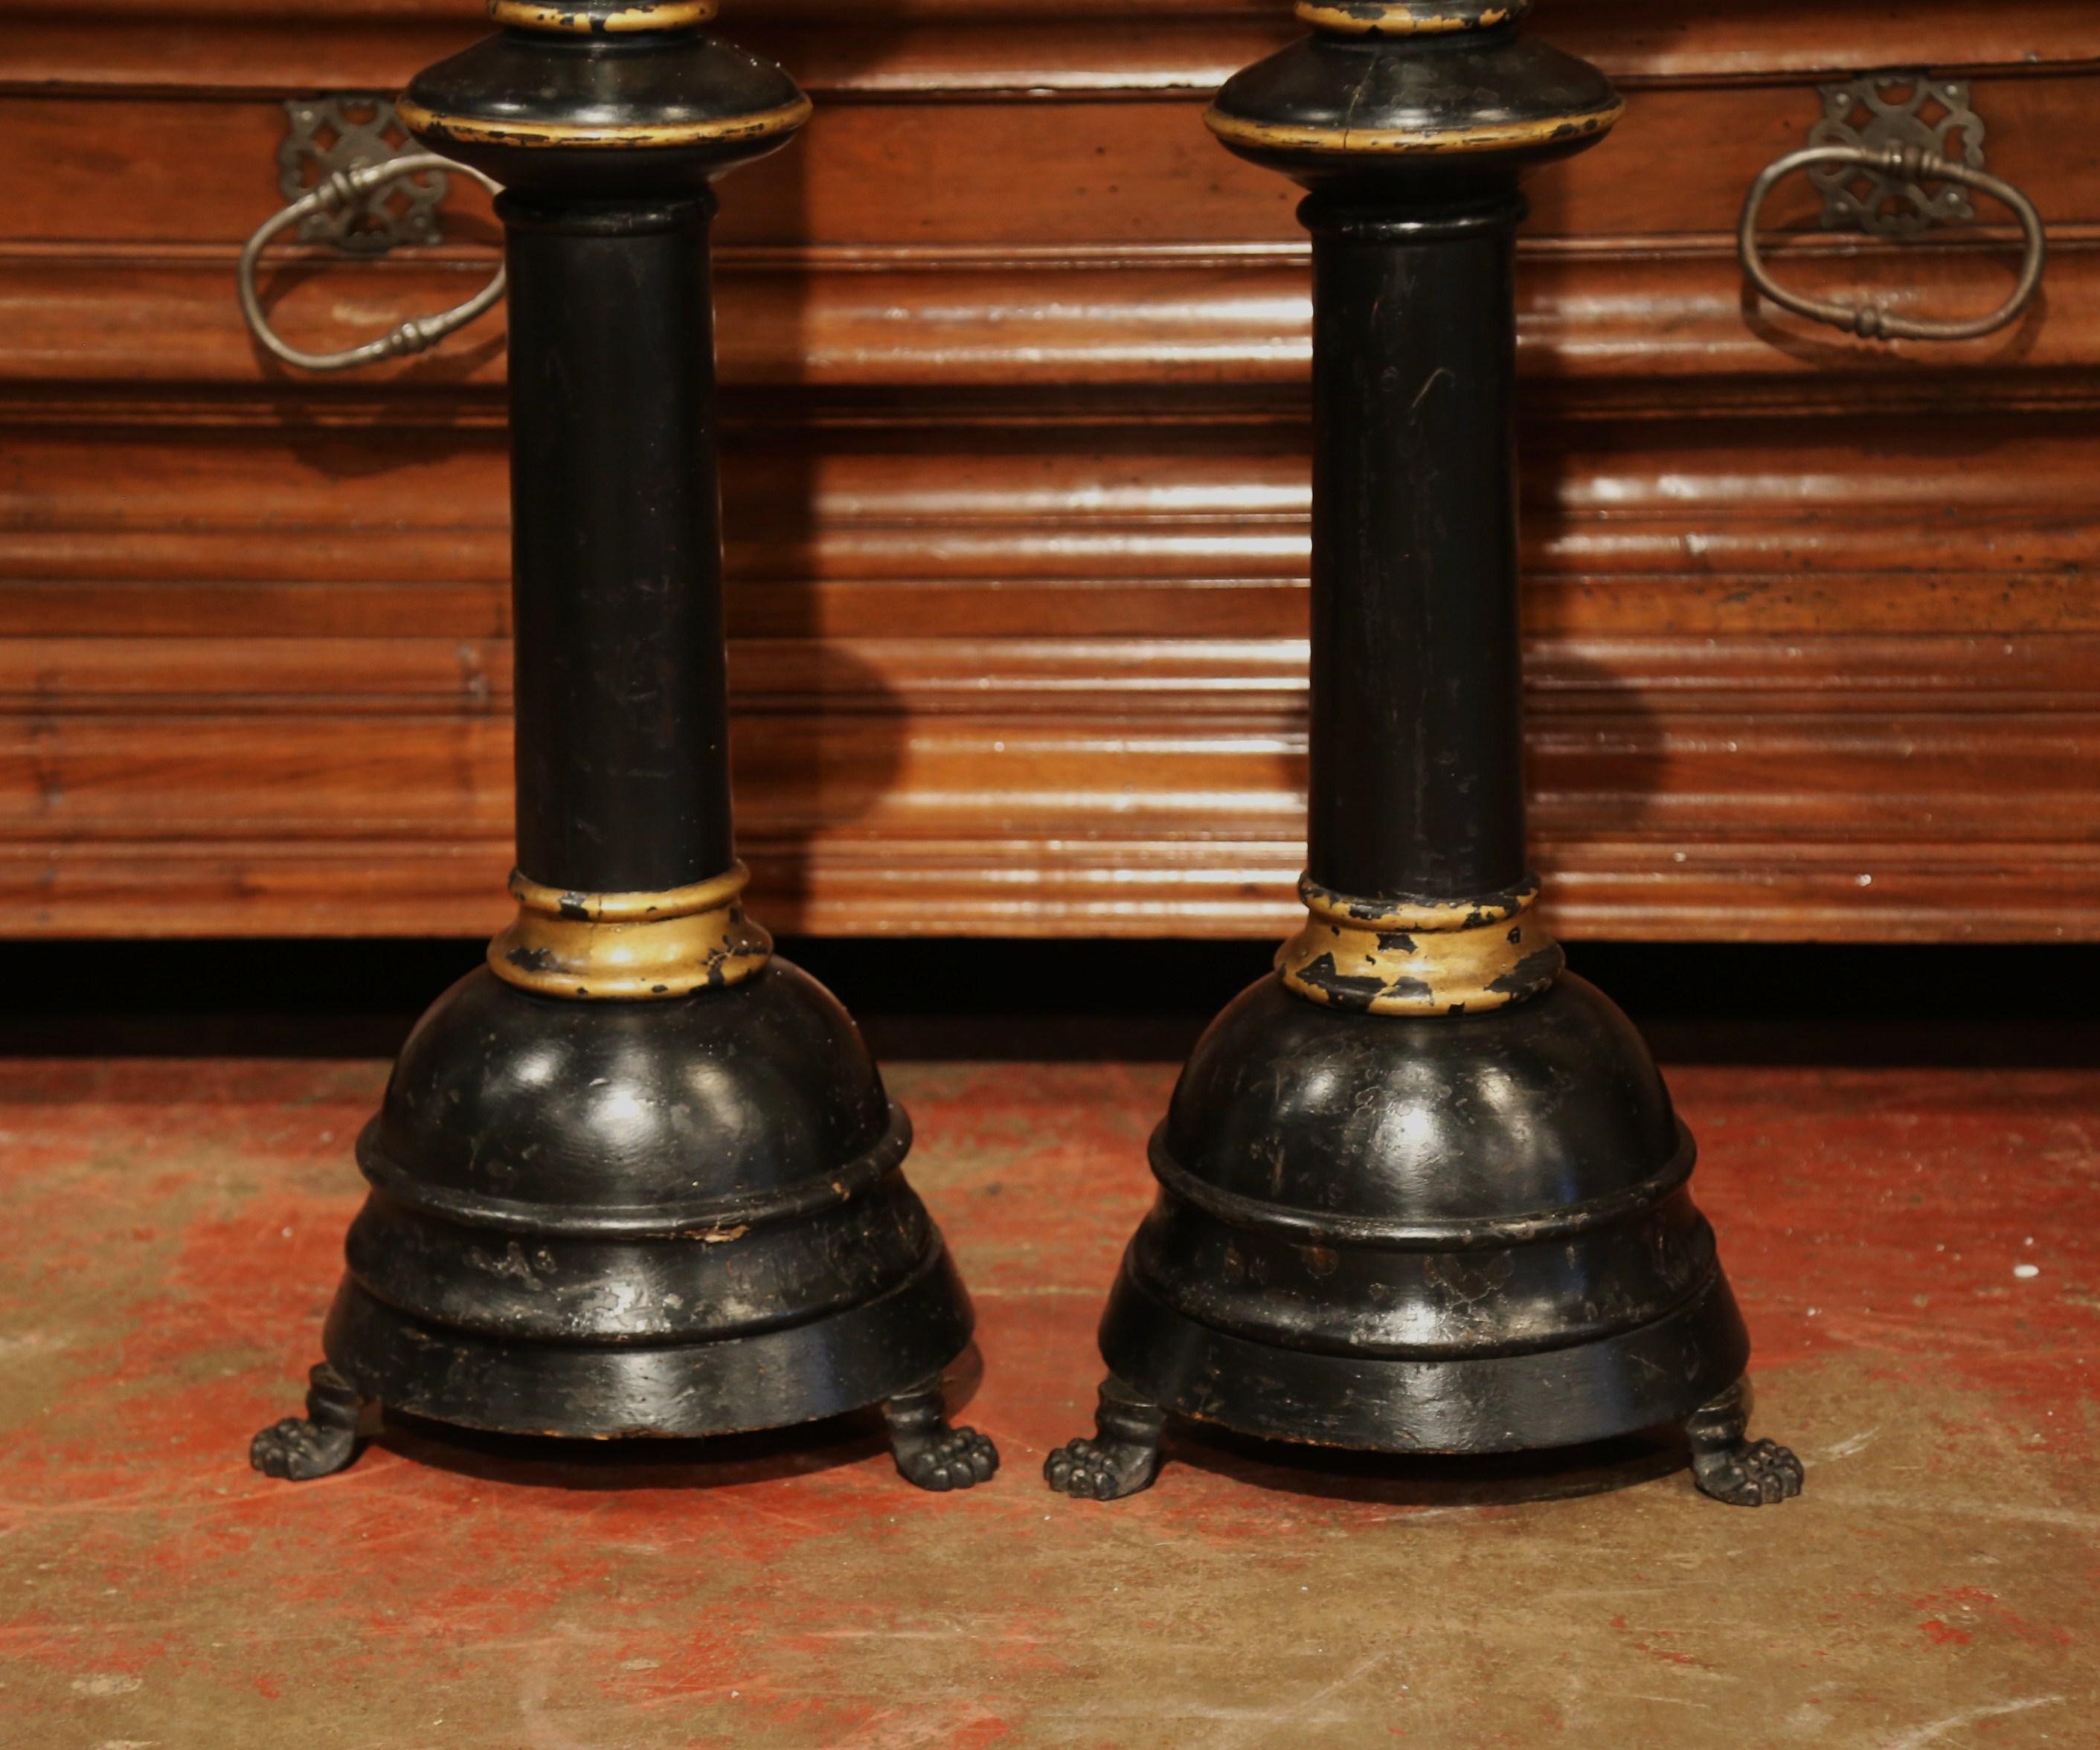 Pair of 19th Century Italian Carved Blackened and Gilt Candlesticks For Sale 3